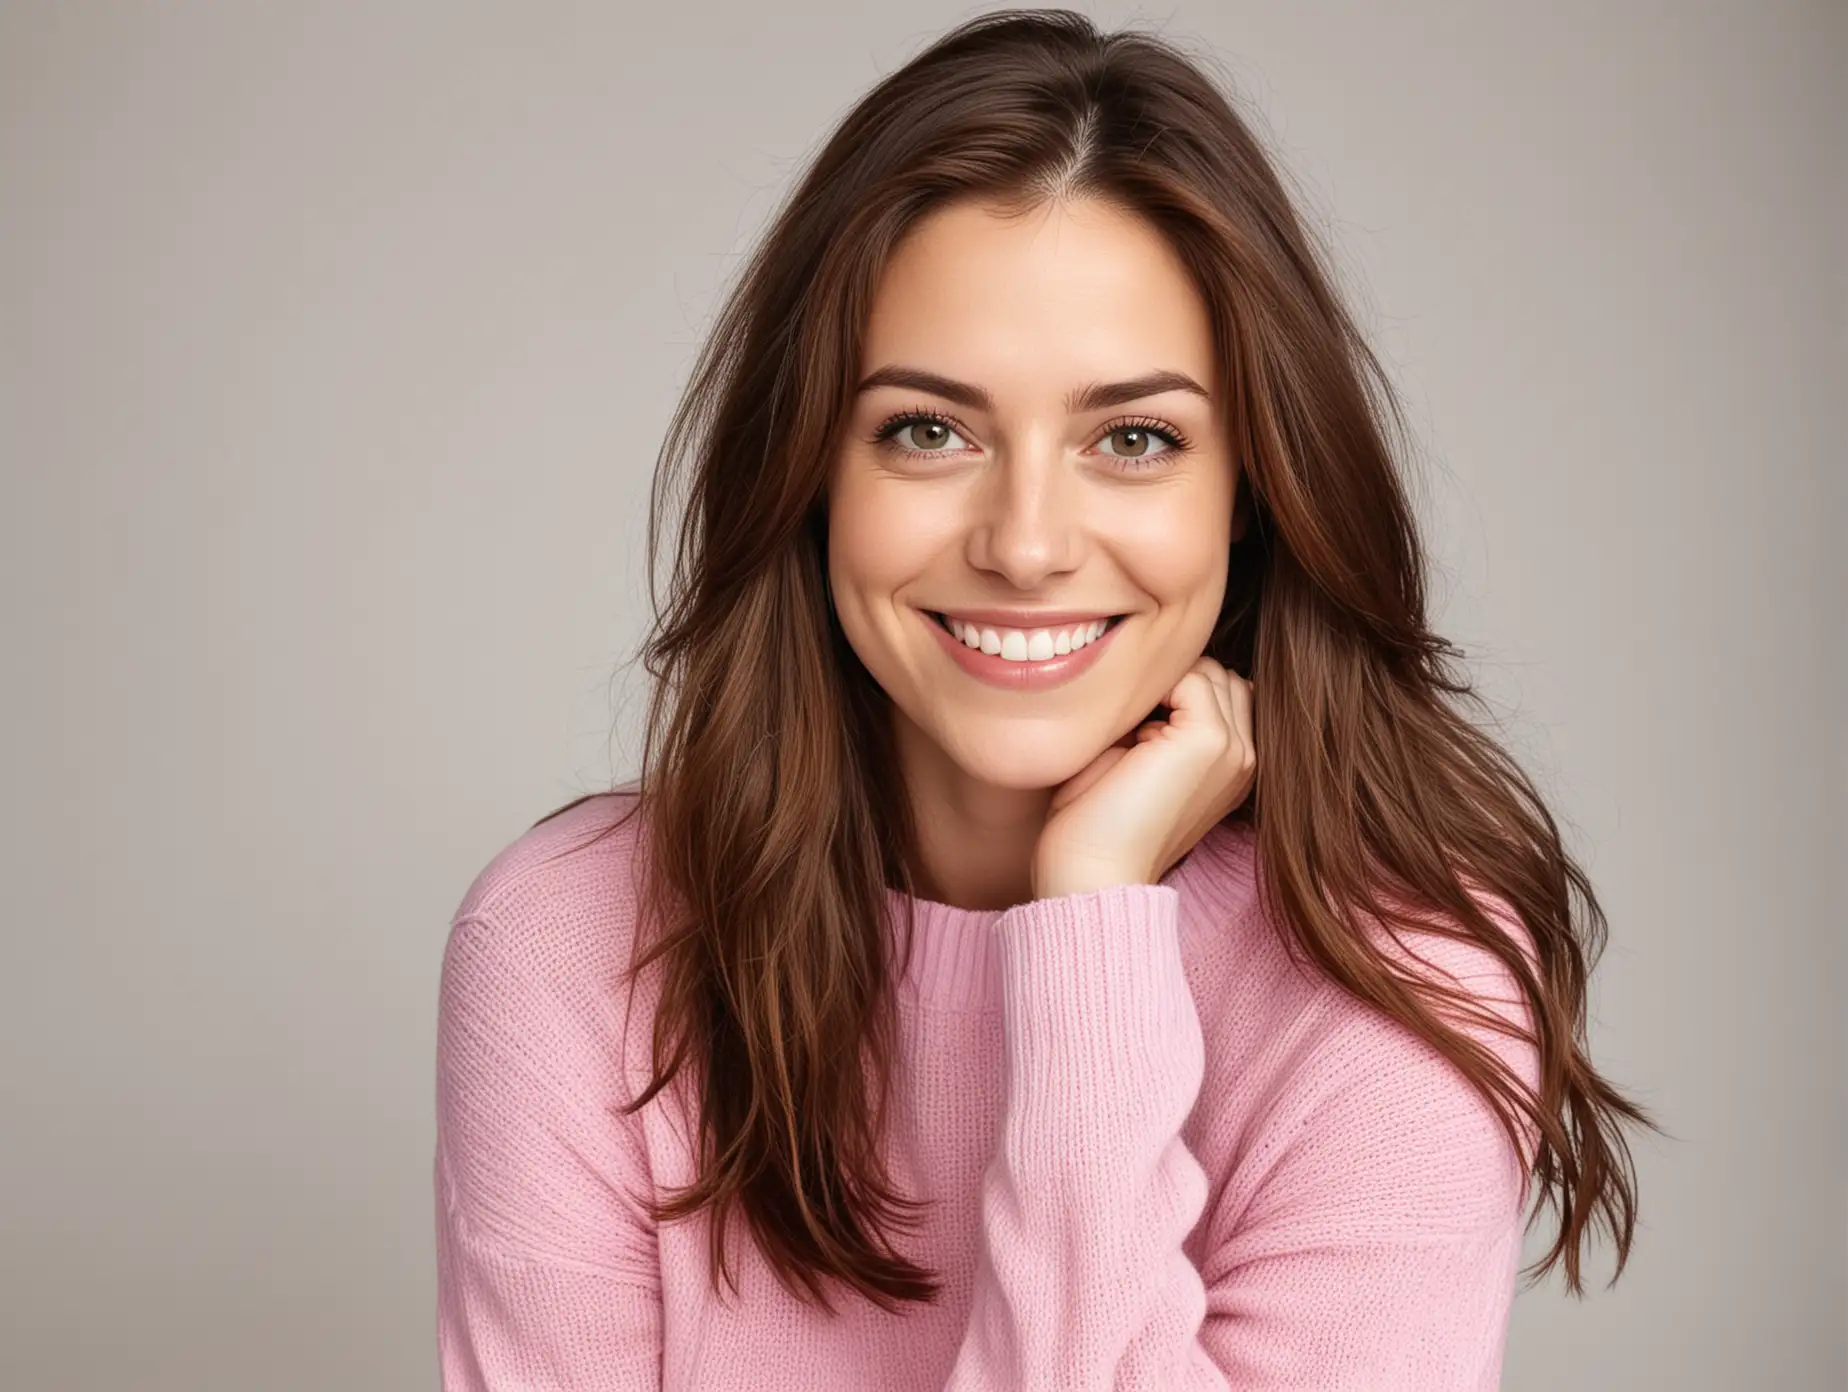 Cheerful Young Woman in Pink Sweater and Blue Jeans Smiling Against White Background